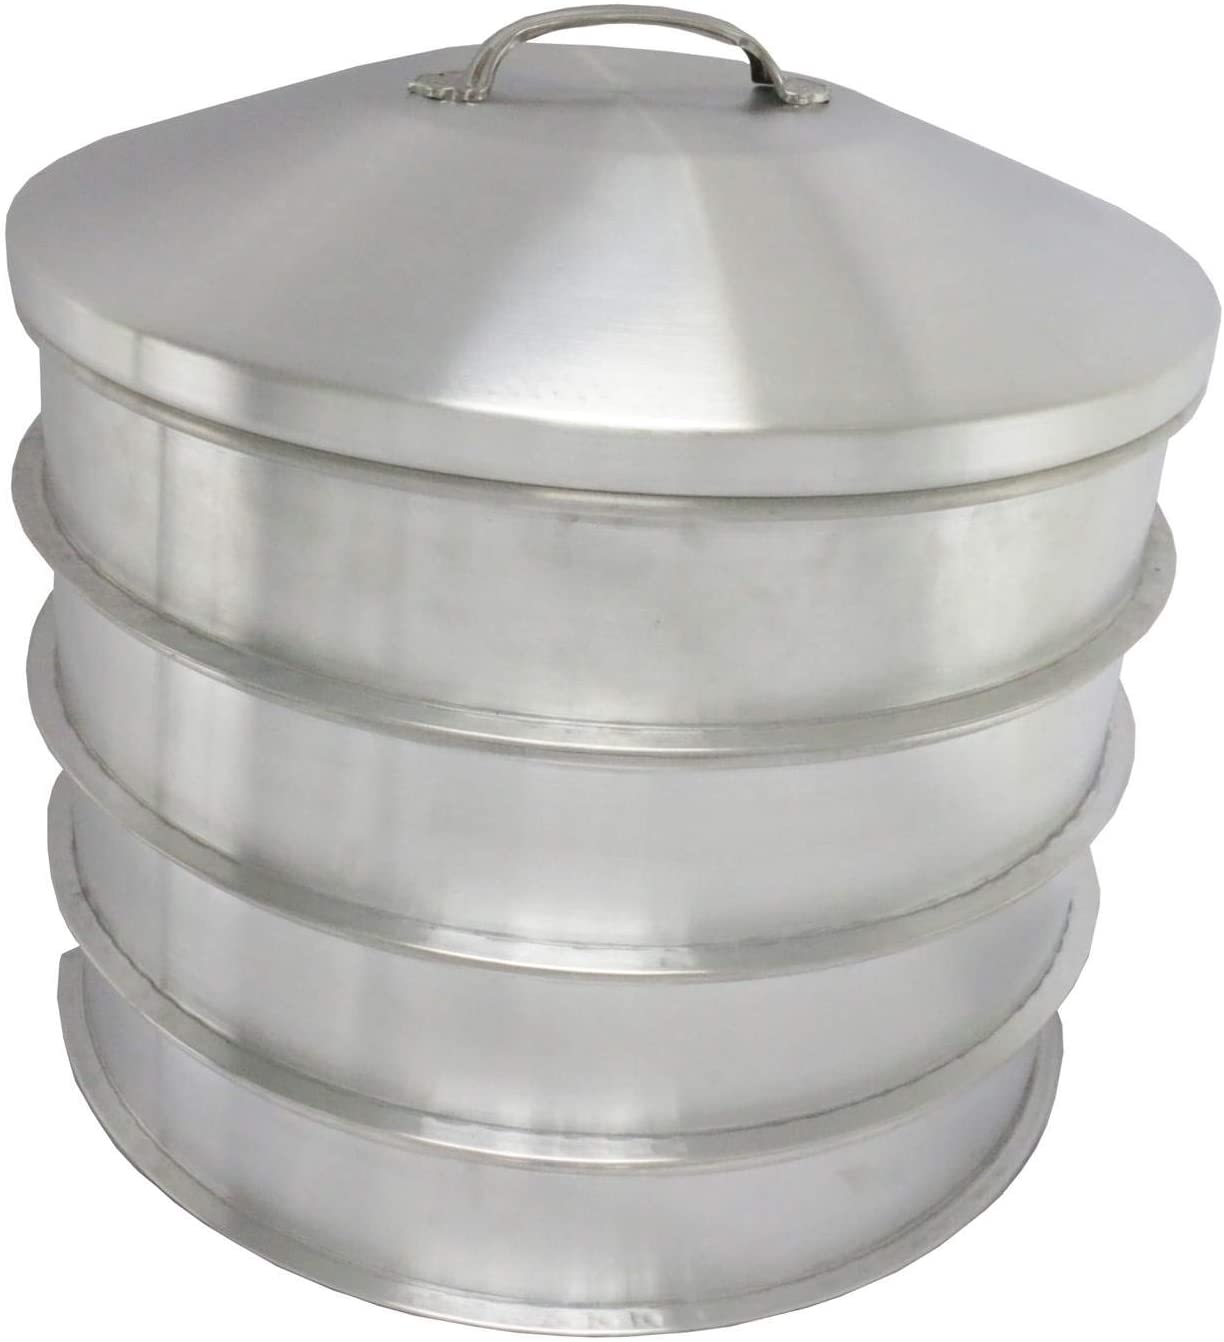 Leyso 4 Aluminum Steam Rack with 1 Steam Cap Set, 20" D x 3-1/2" H - Great for Dim Sum, Vegetables, Meat and Fish (5 Piece Set)